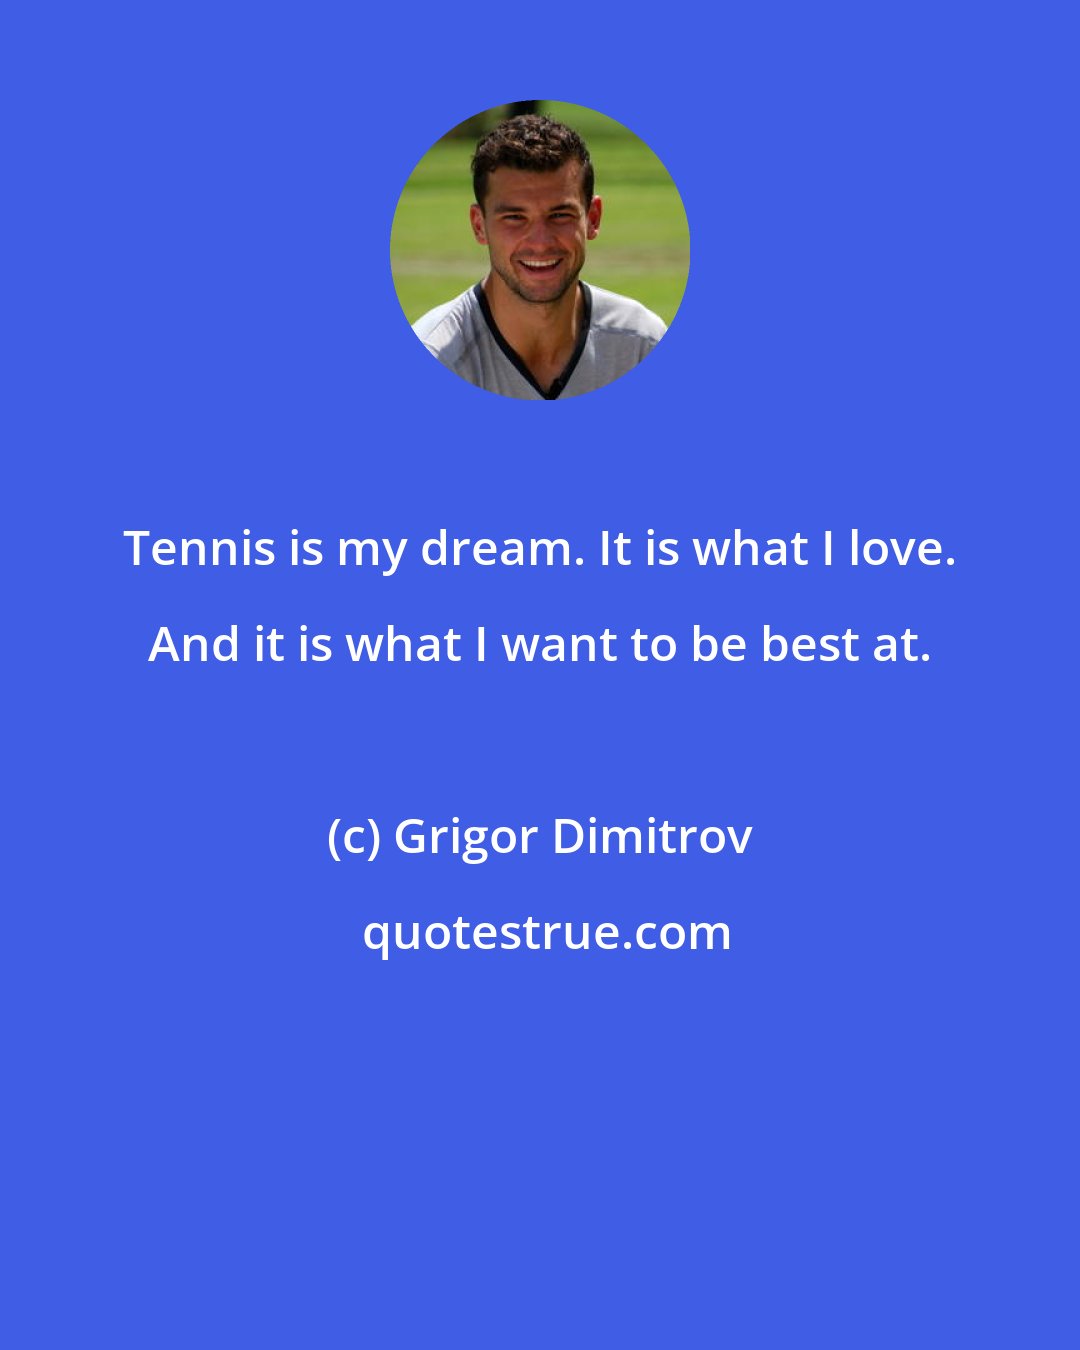 Grigor Dimitrov: Tennis is my dream. It is what I love. And it is what I want to be best at.